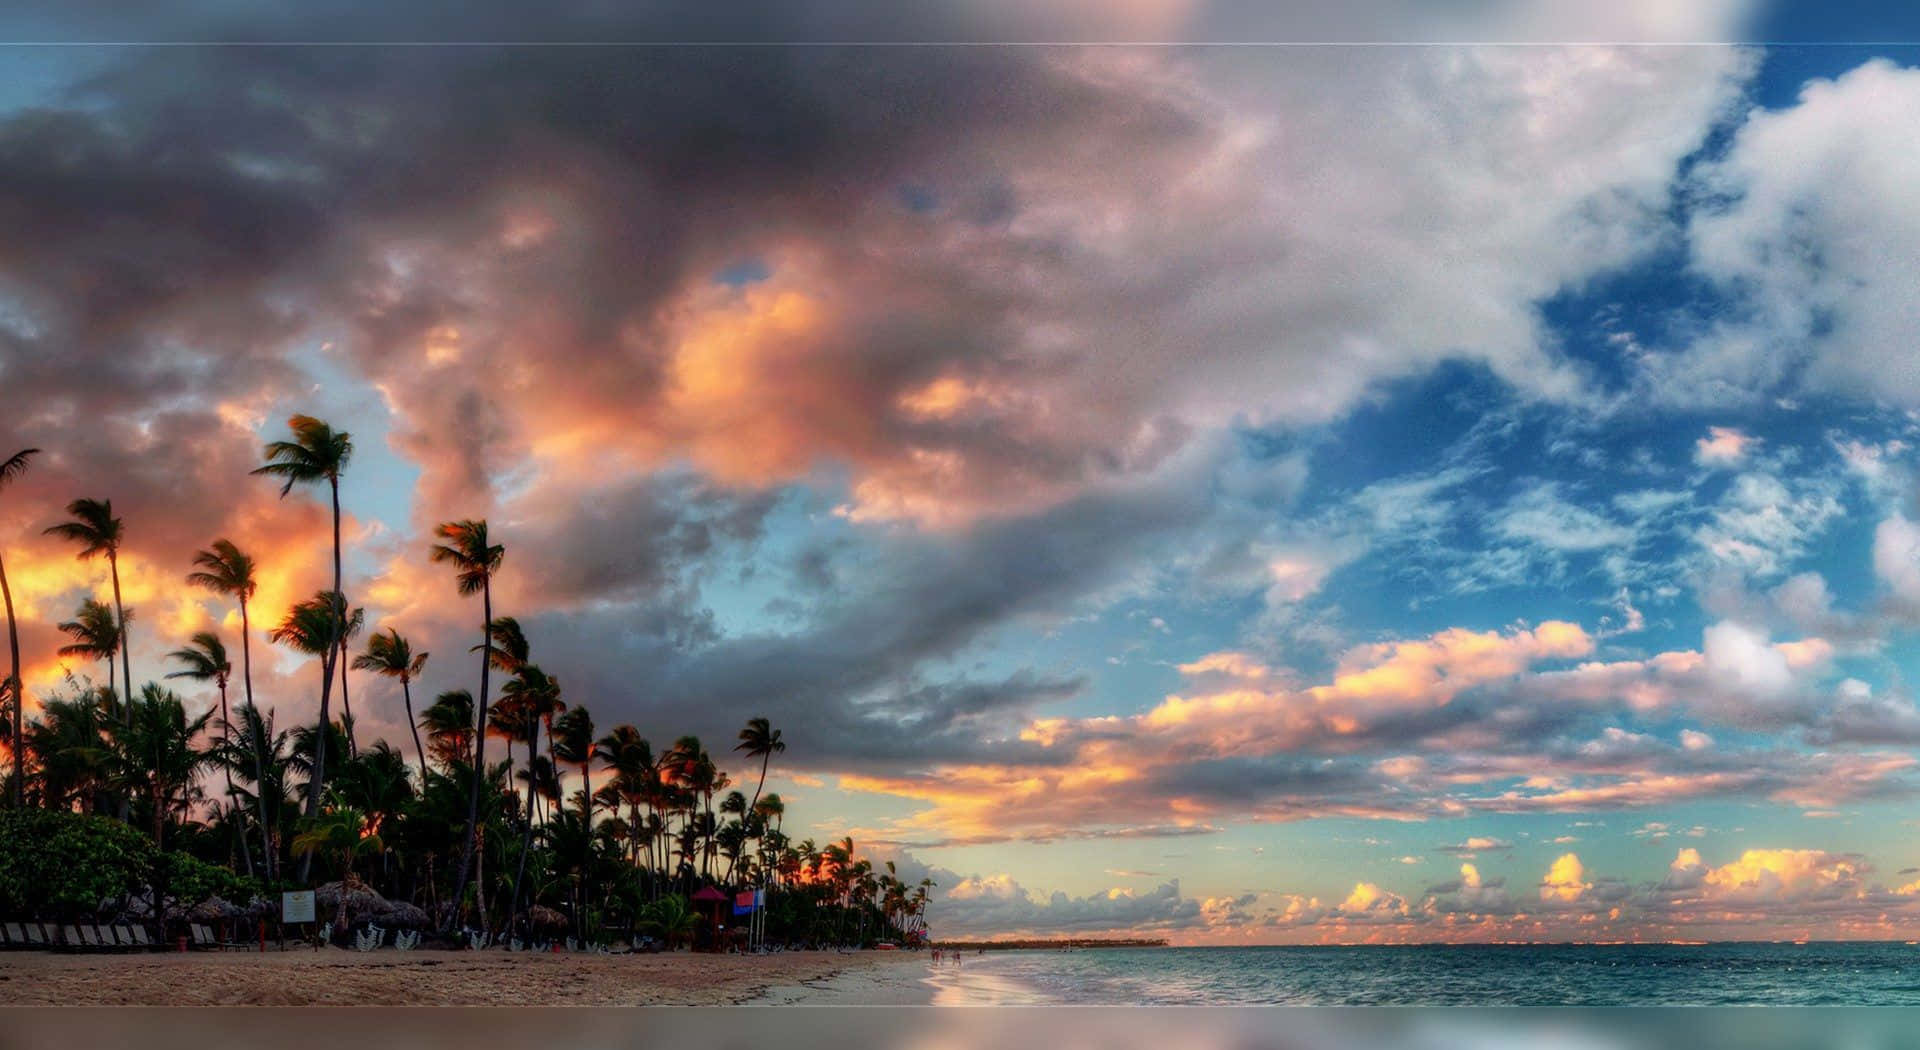 A Beach With Palm Trees And Clouds In The Sky Wallpaper